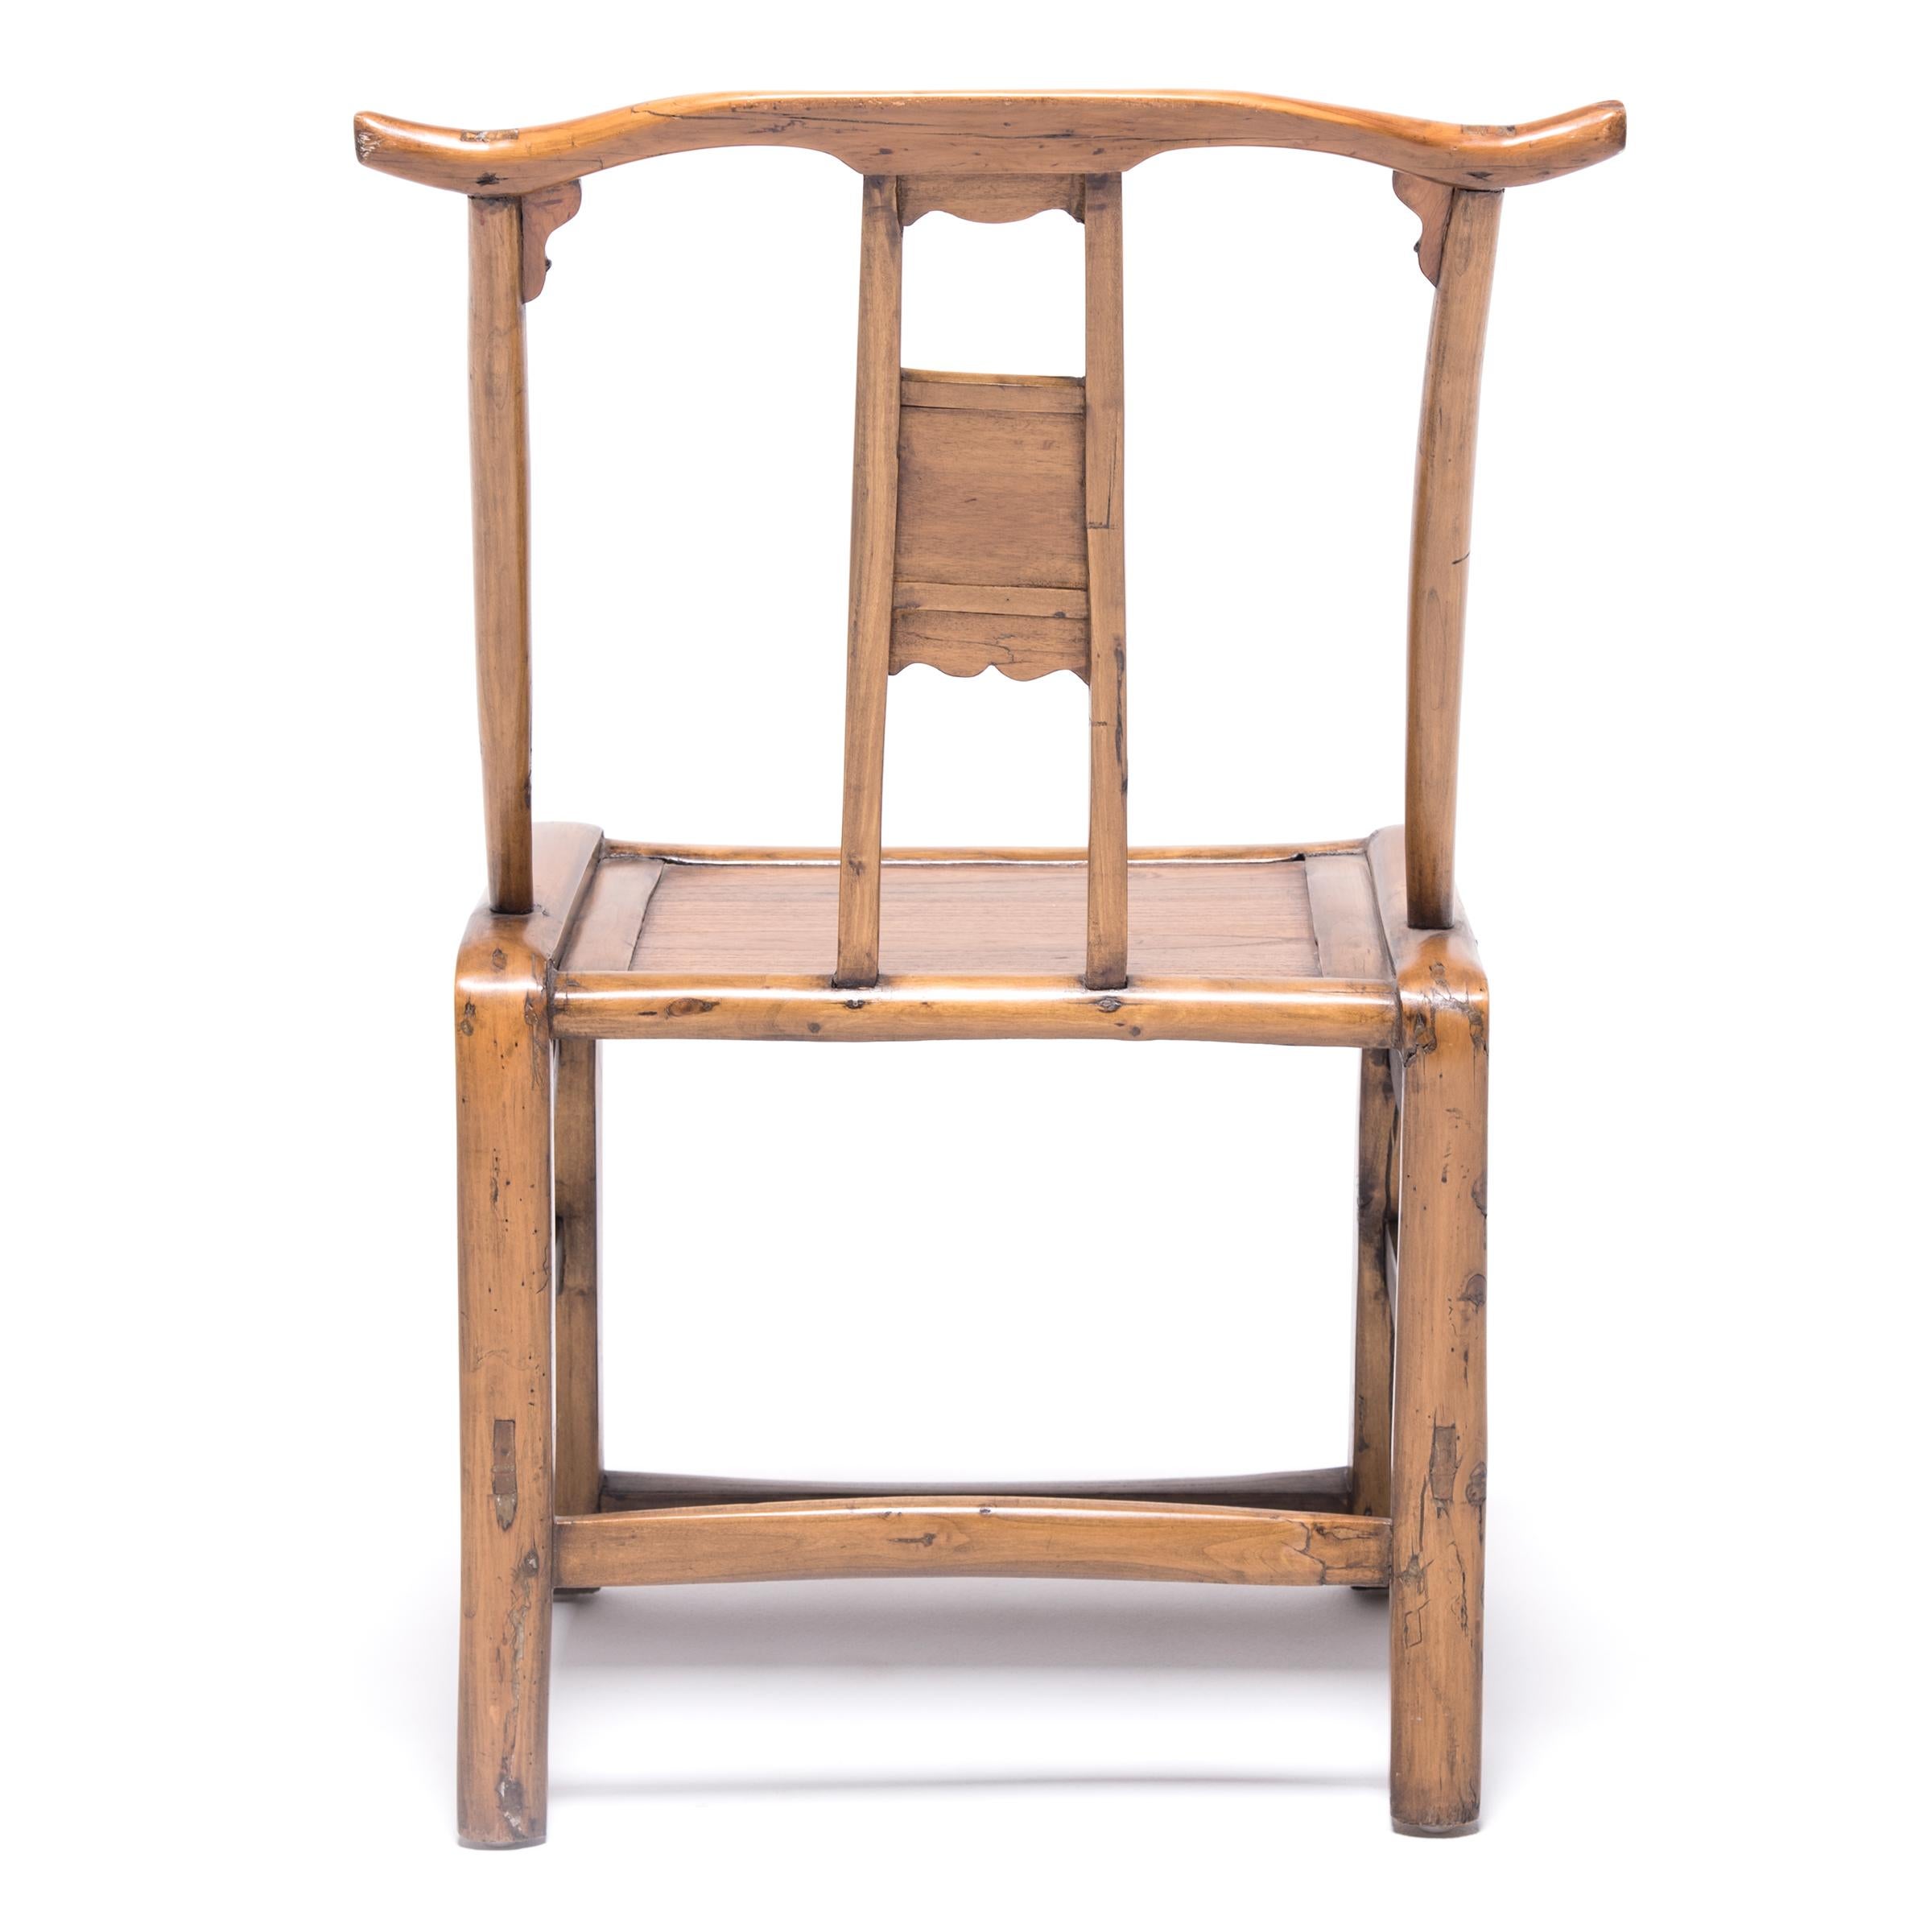 Pair of Chinese Provincial Bentform Chairs, c. 1850 For Sale 7